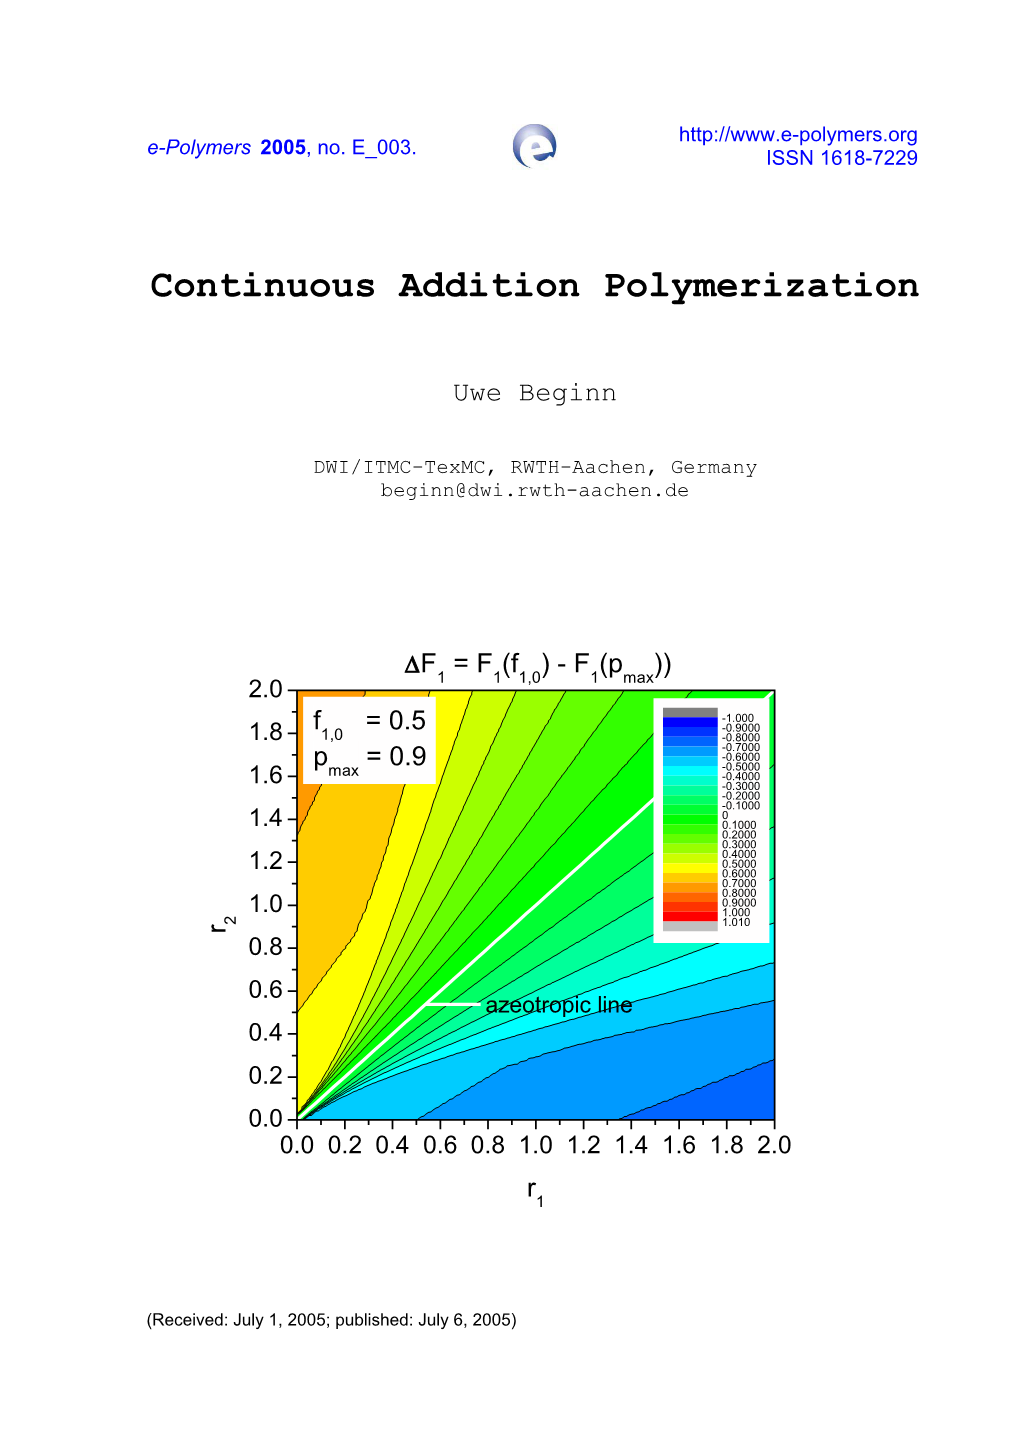 Continuous Addition Polymerization